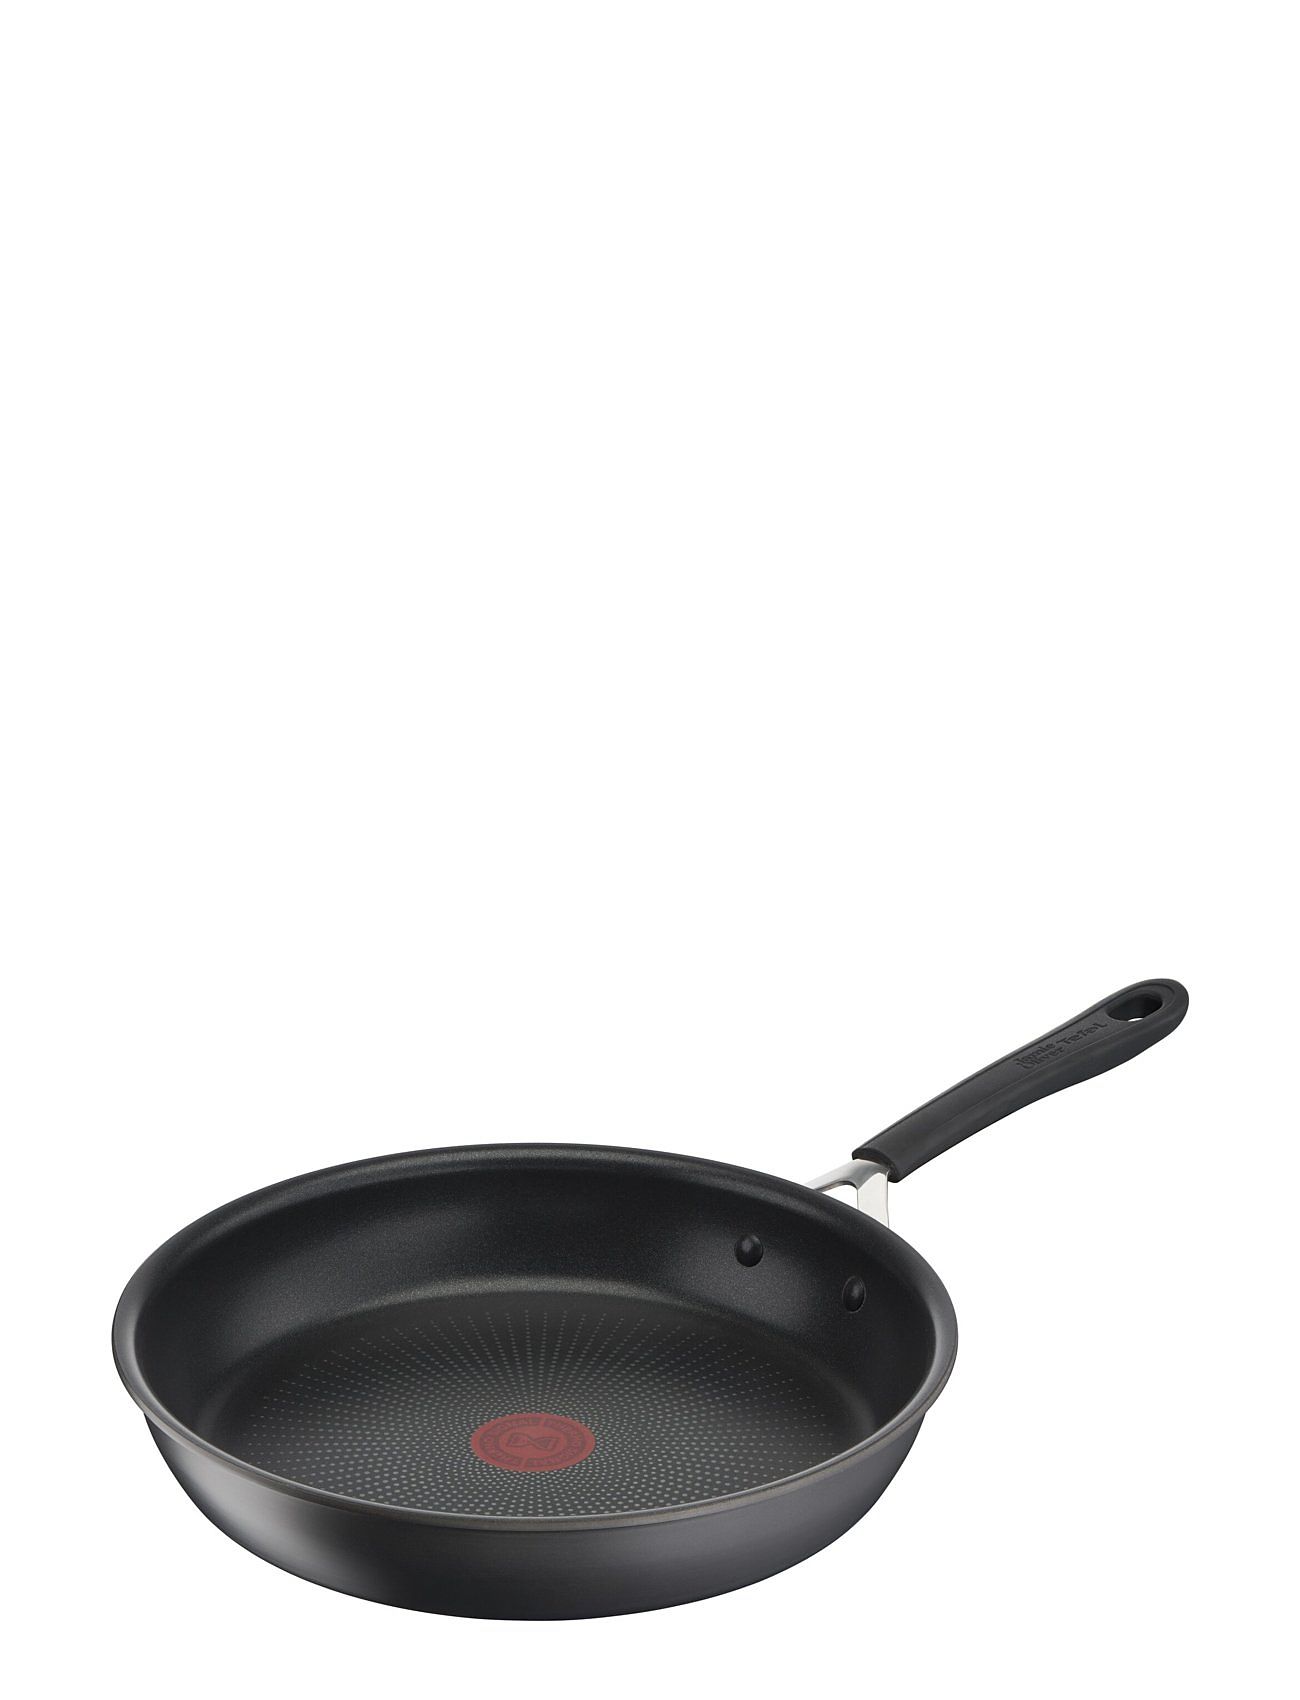 Jamie Hard & pfannen – Jamie Cm töpfe Oliver Easy 28 & Frypan Quick Oliver Tefal – Anodised